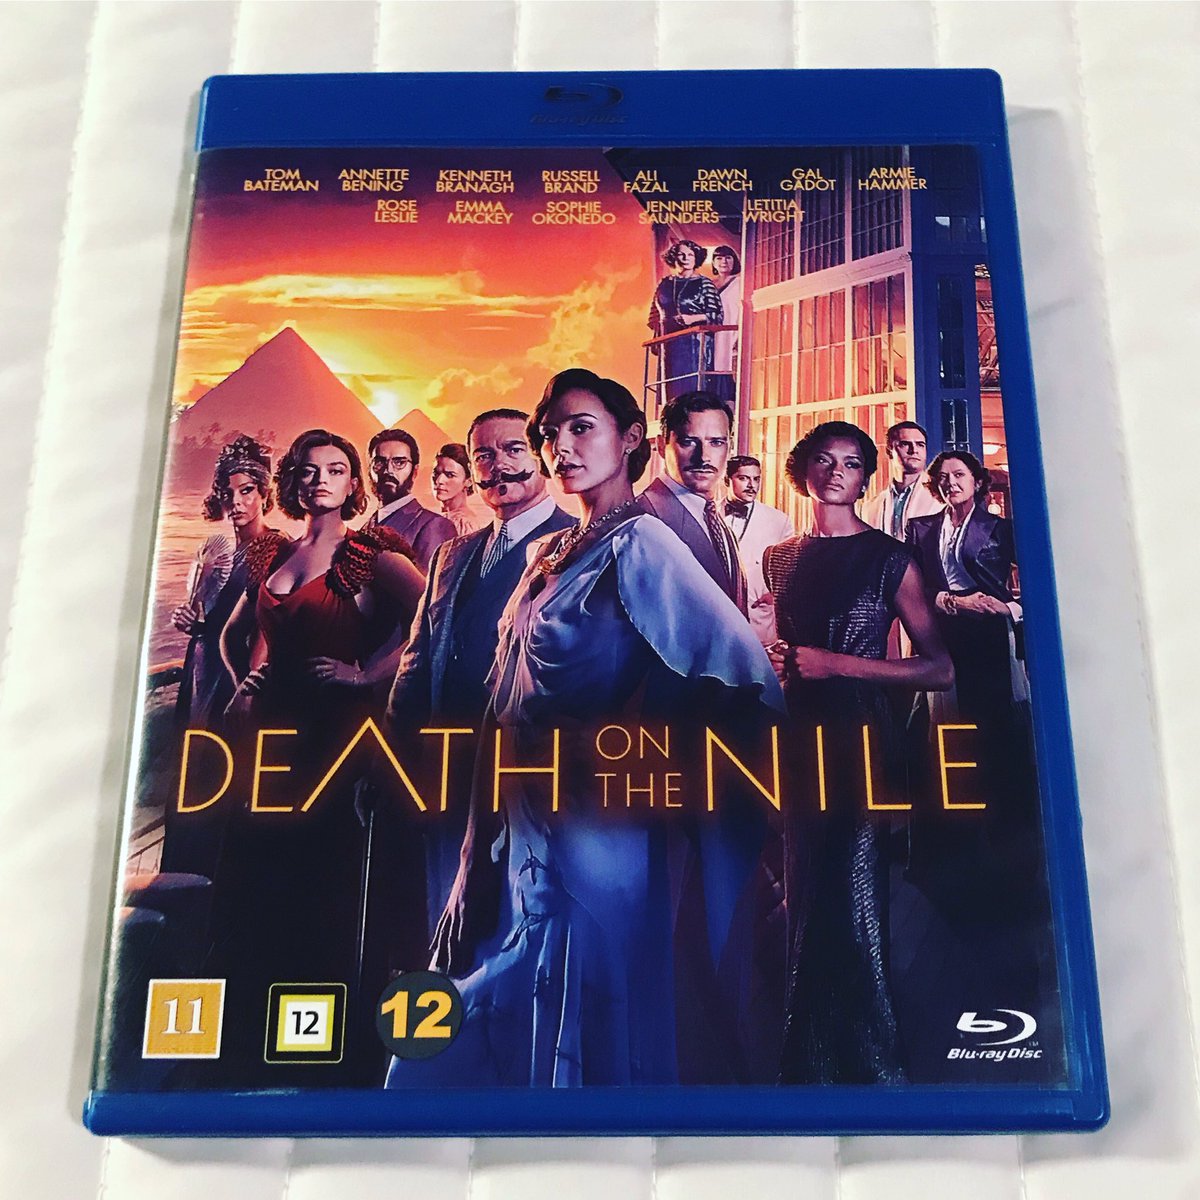 Watching 'Death On The Nile' (2022). Directed by Kenneth Branagh. I'm a huge fan of the 1978 movie so I had to see this version too. 🎥🎞

#DeathOnTheNile #DeathOnTheNile2022 #KennethBranagh #TomBateman #AnnetteBening #GalGadot #AliFazal #DawnFrench #JenniferSaunders #bluray